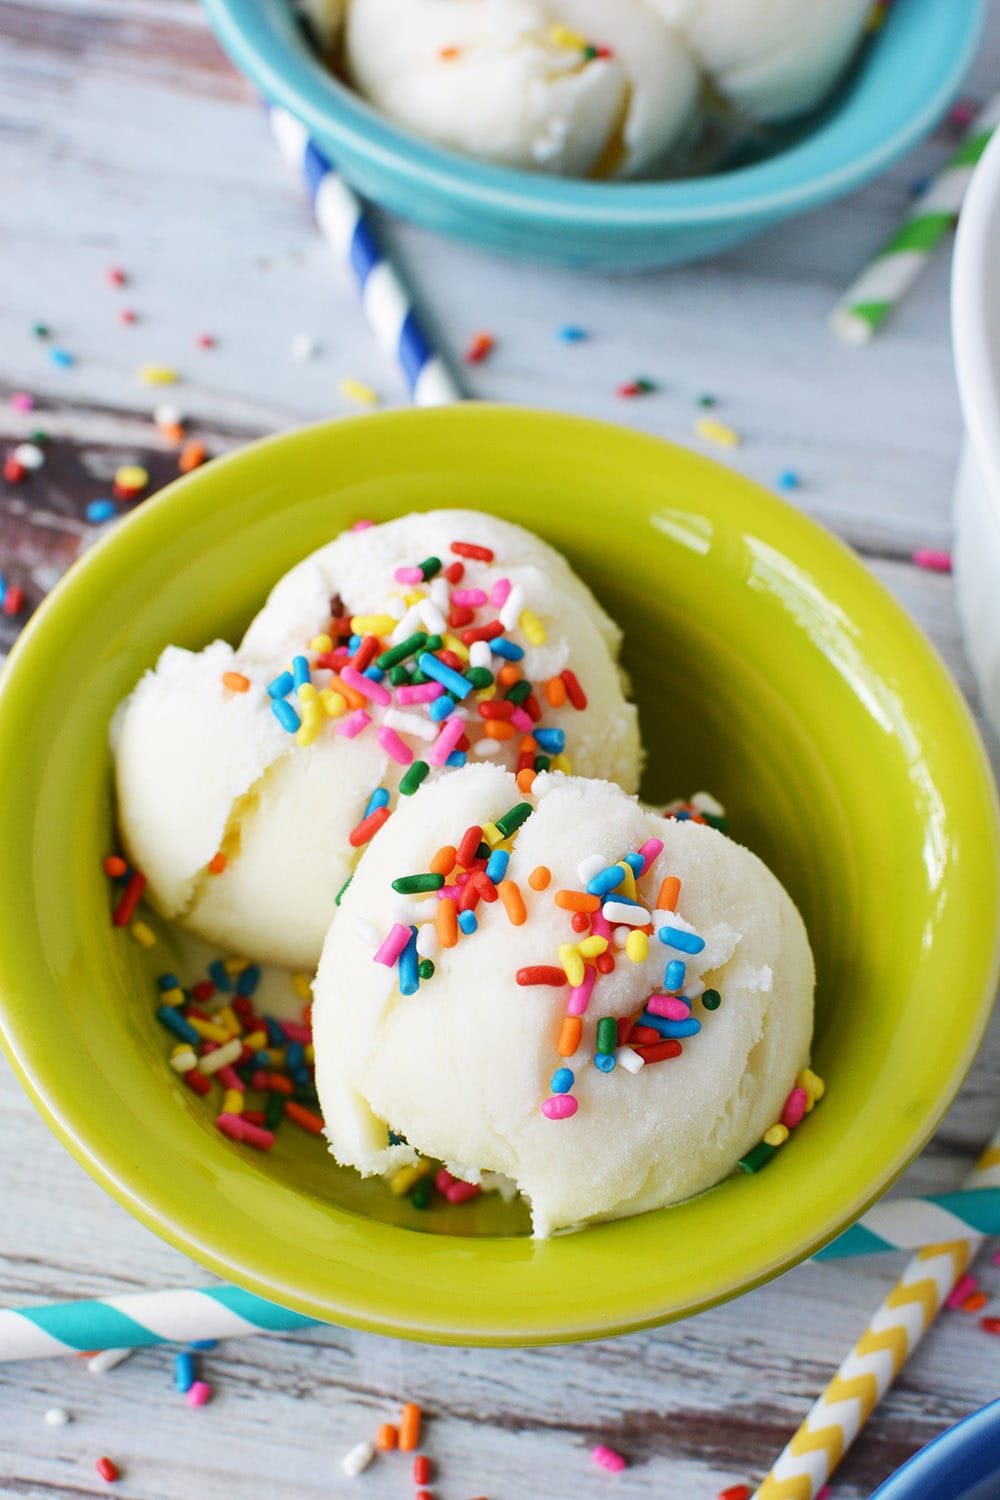 Birthday cake ice cream topped with sprinkles in a green bowl